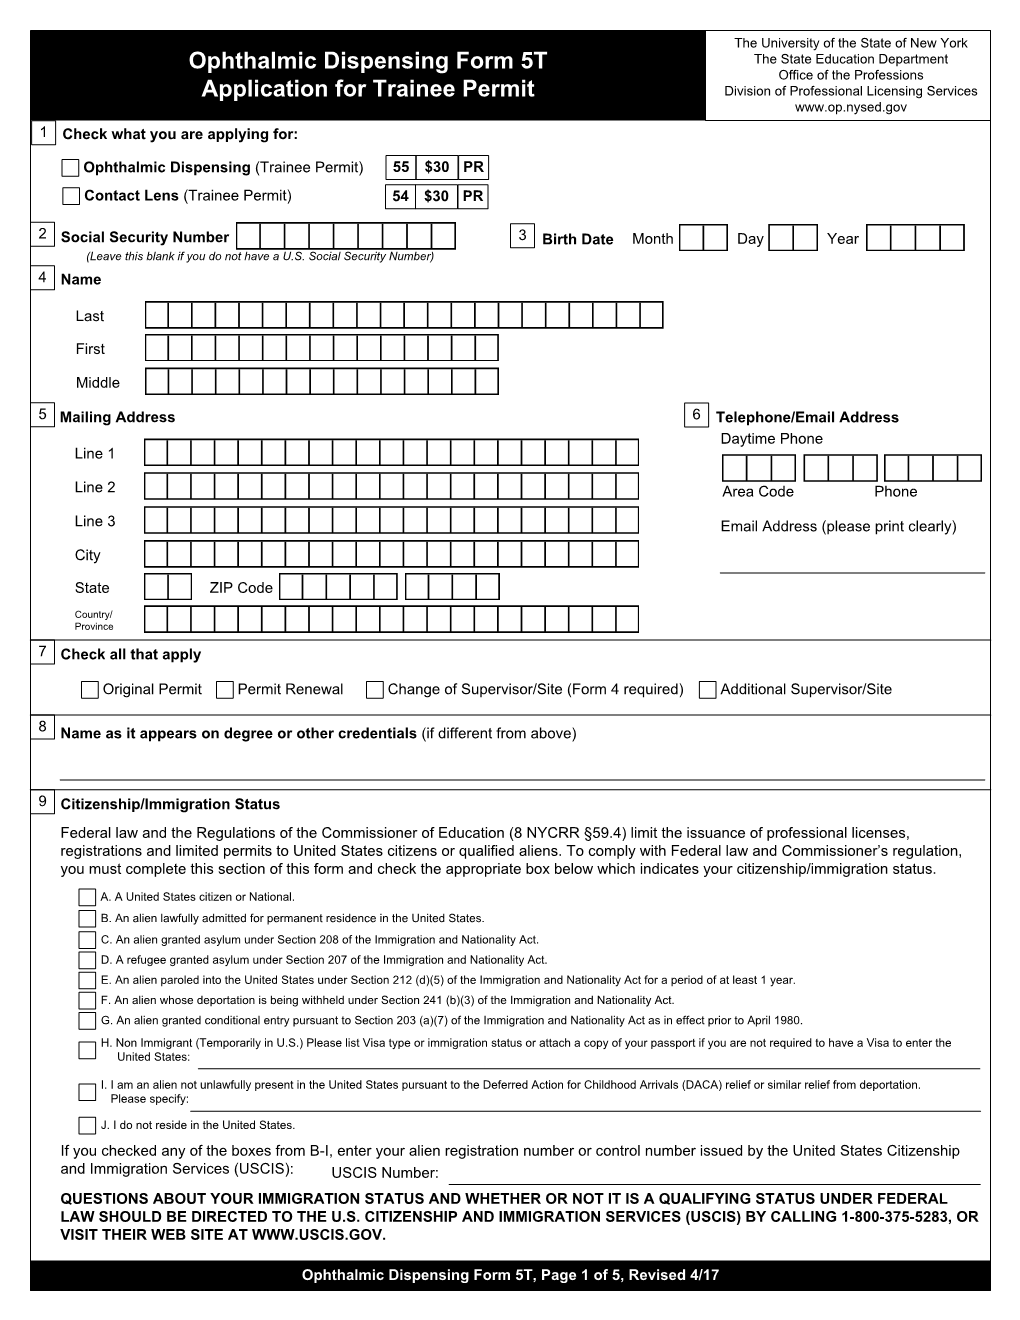 Ophthalmic Dispensing Form 5T